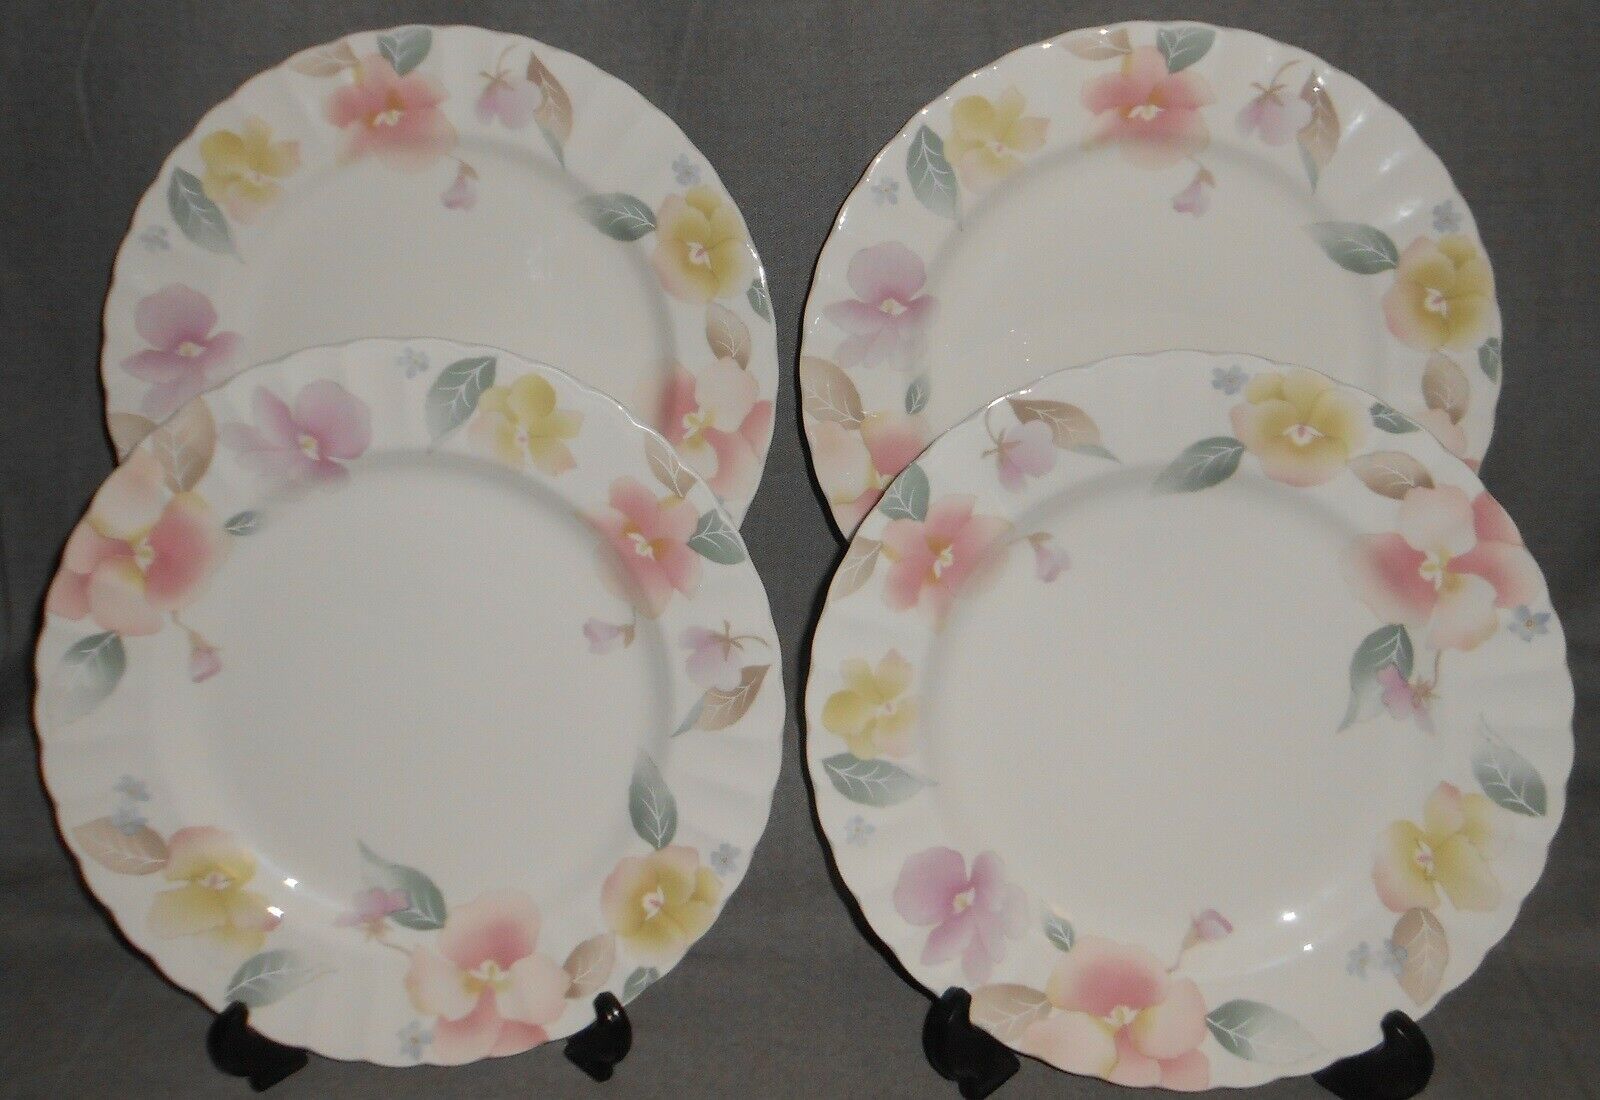 Primary image for Set (4) MIKASA Maxima SILK BLOSSOMS PATTERN Dinner Plates MADE IN JAPAN